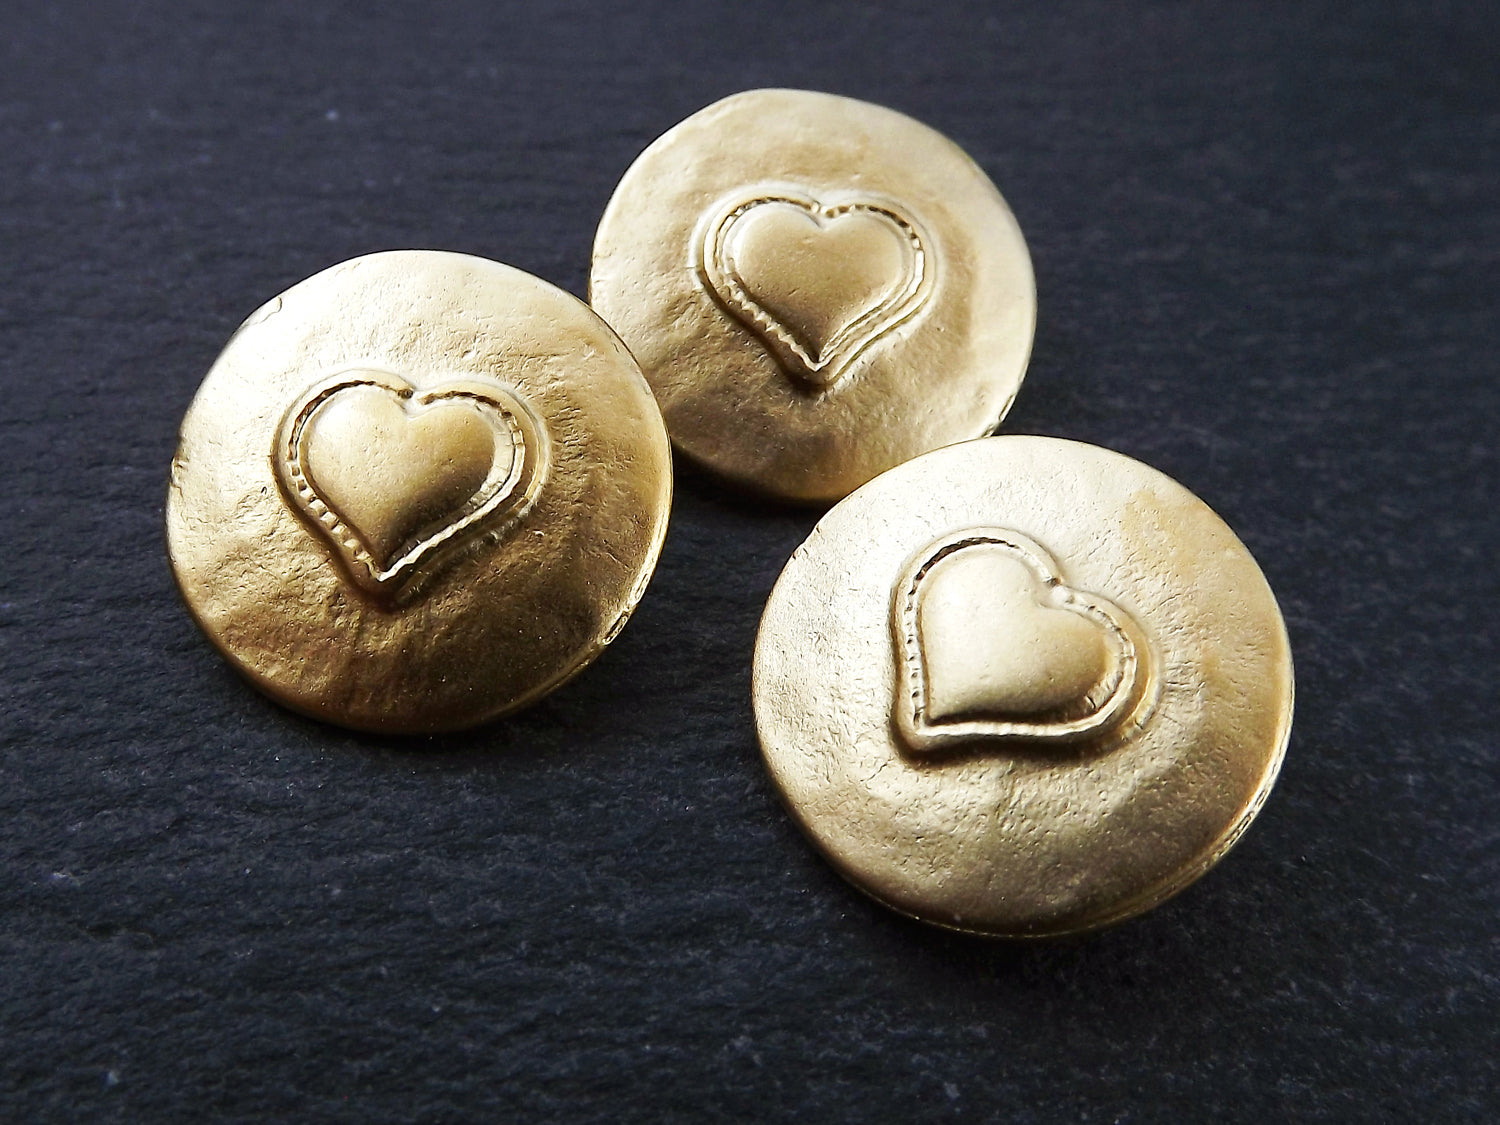 3 Rustic Metal Heart Buttons 22k Matte Gold Plated - Round Silver